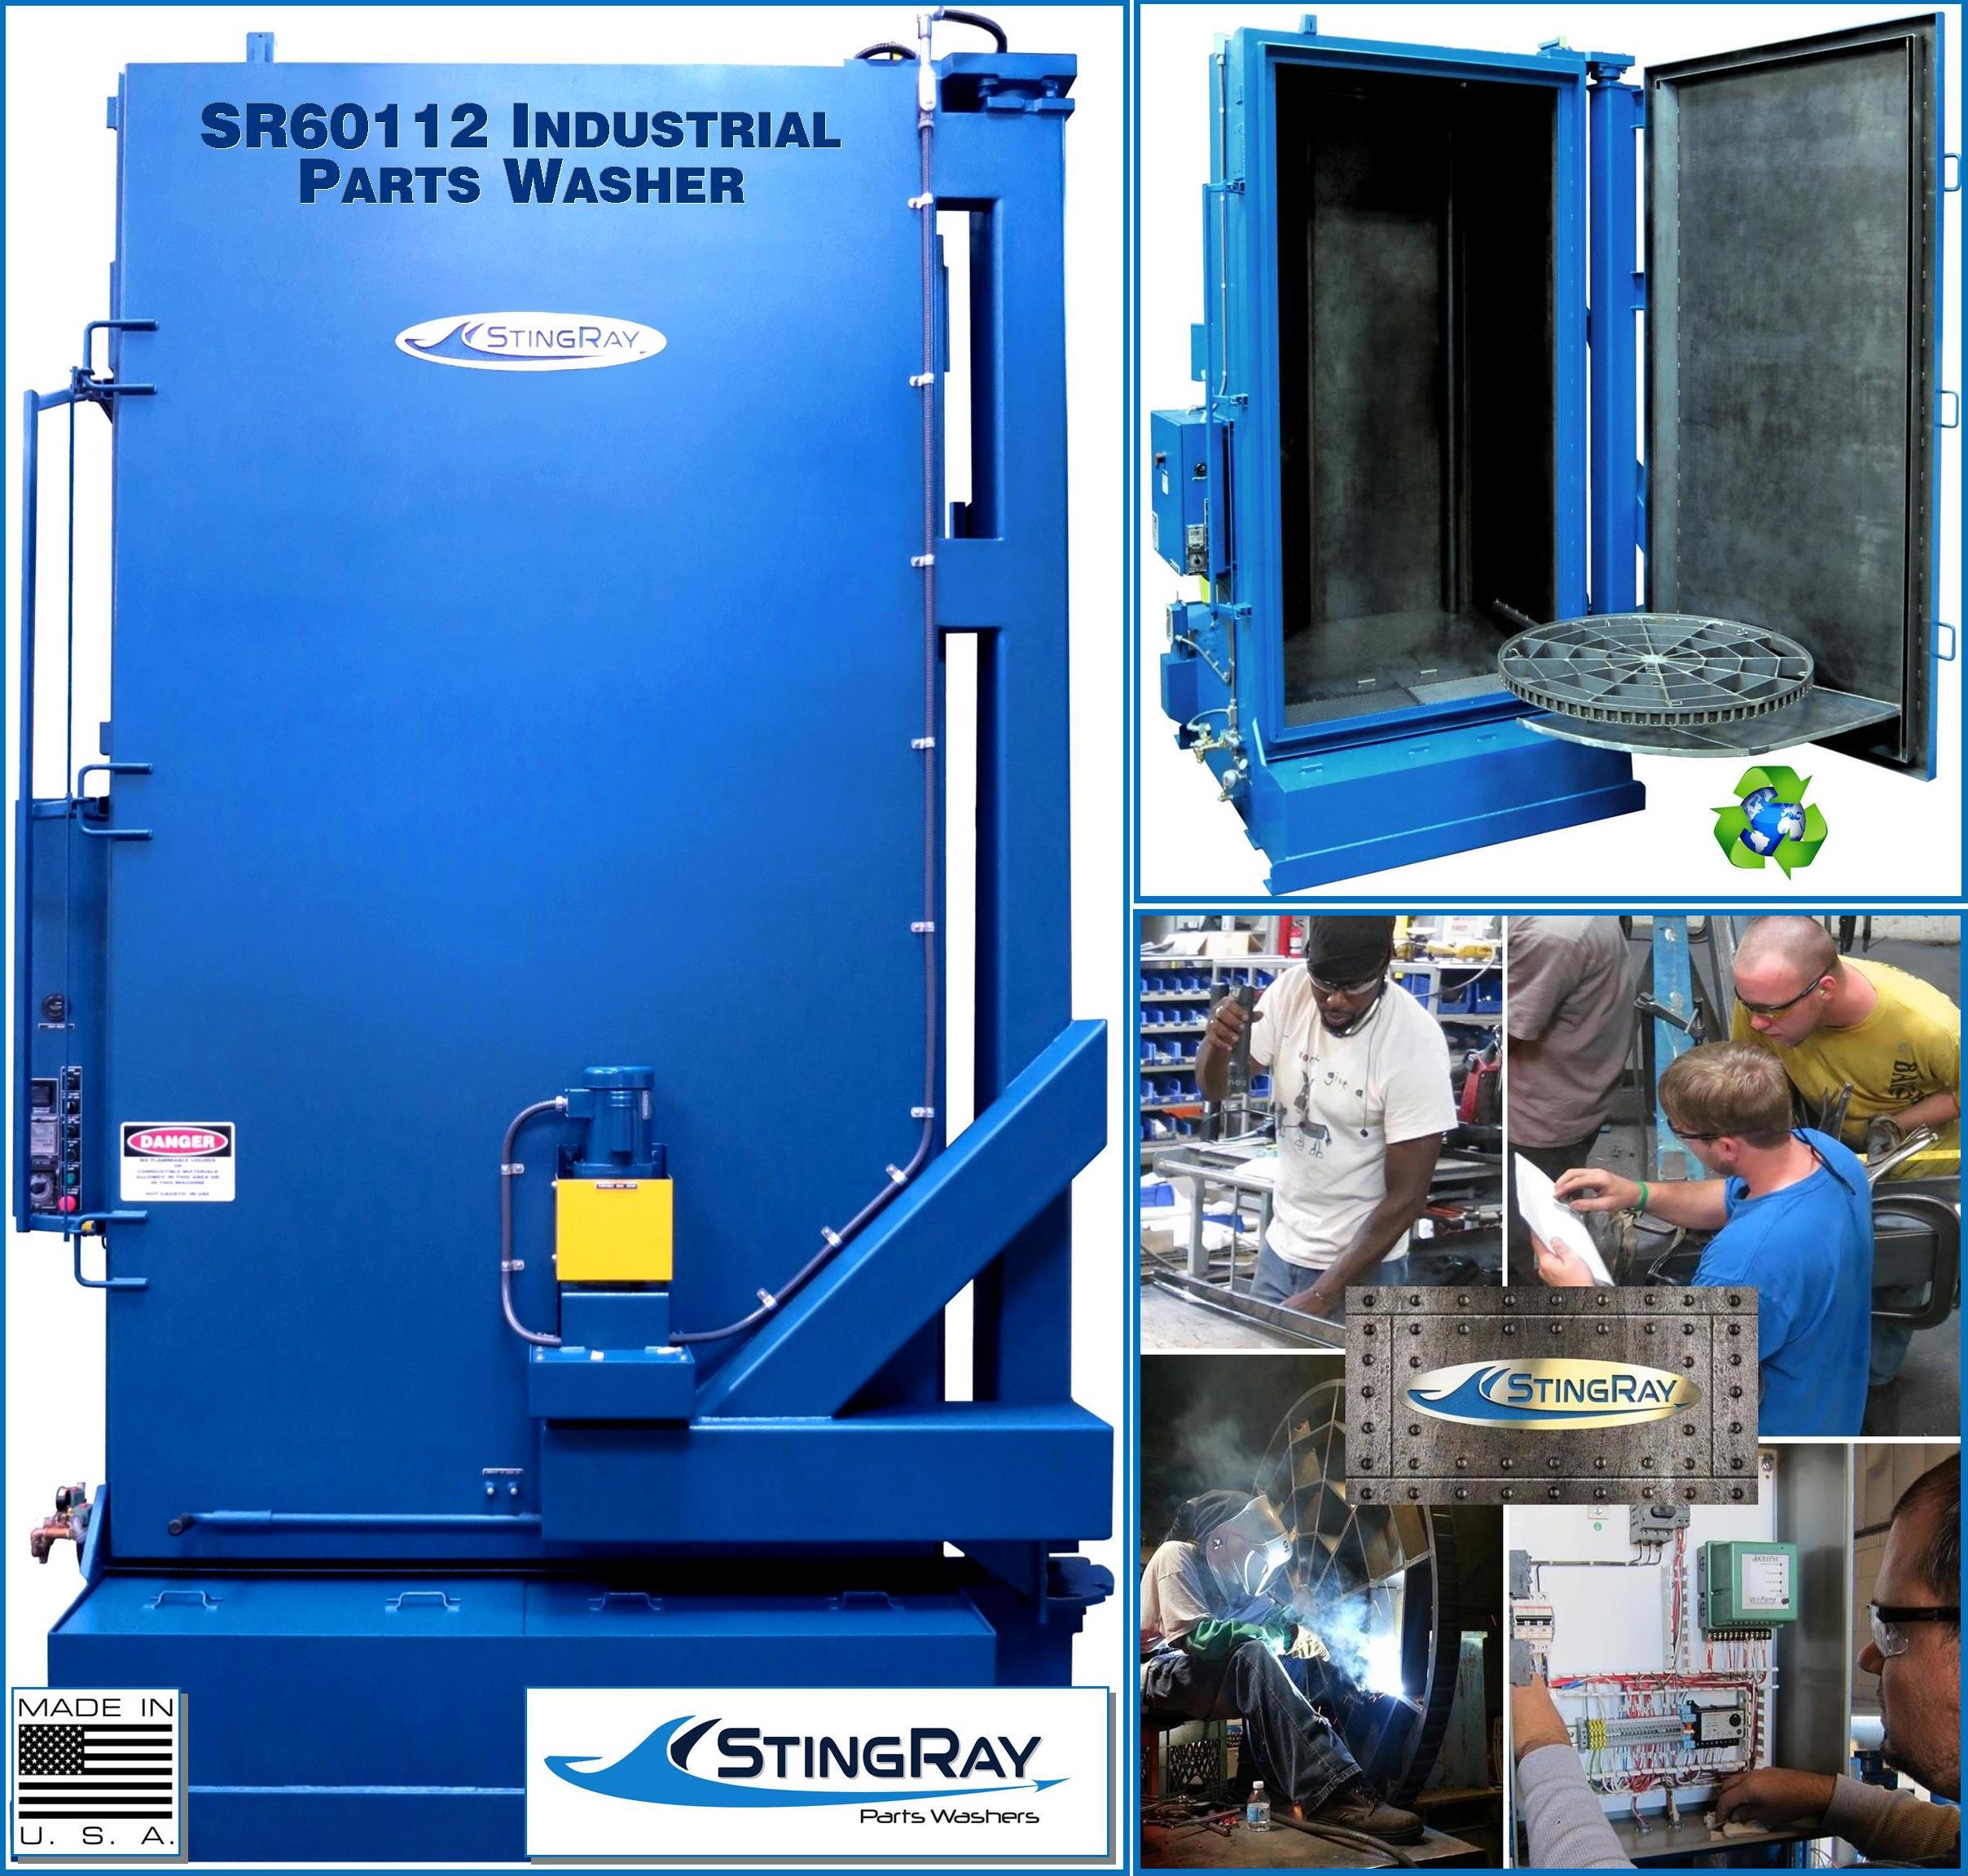 Heavy-Duty-Industrial-Parts-Washer-by-StingRay-SR60112